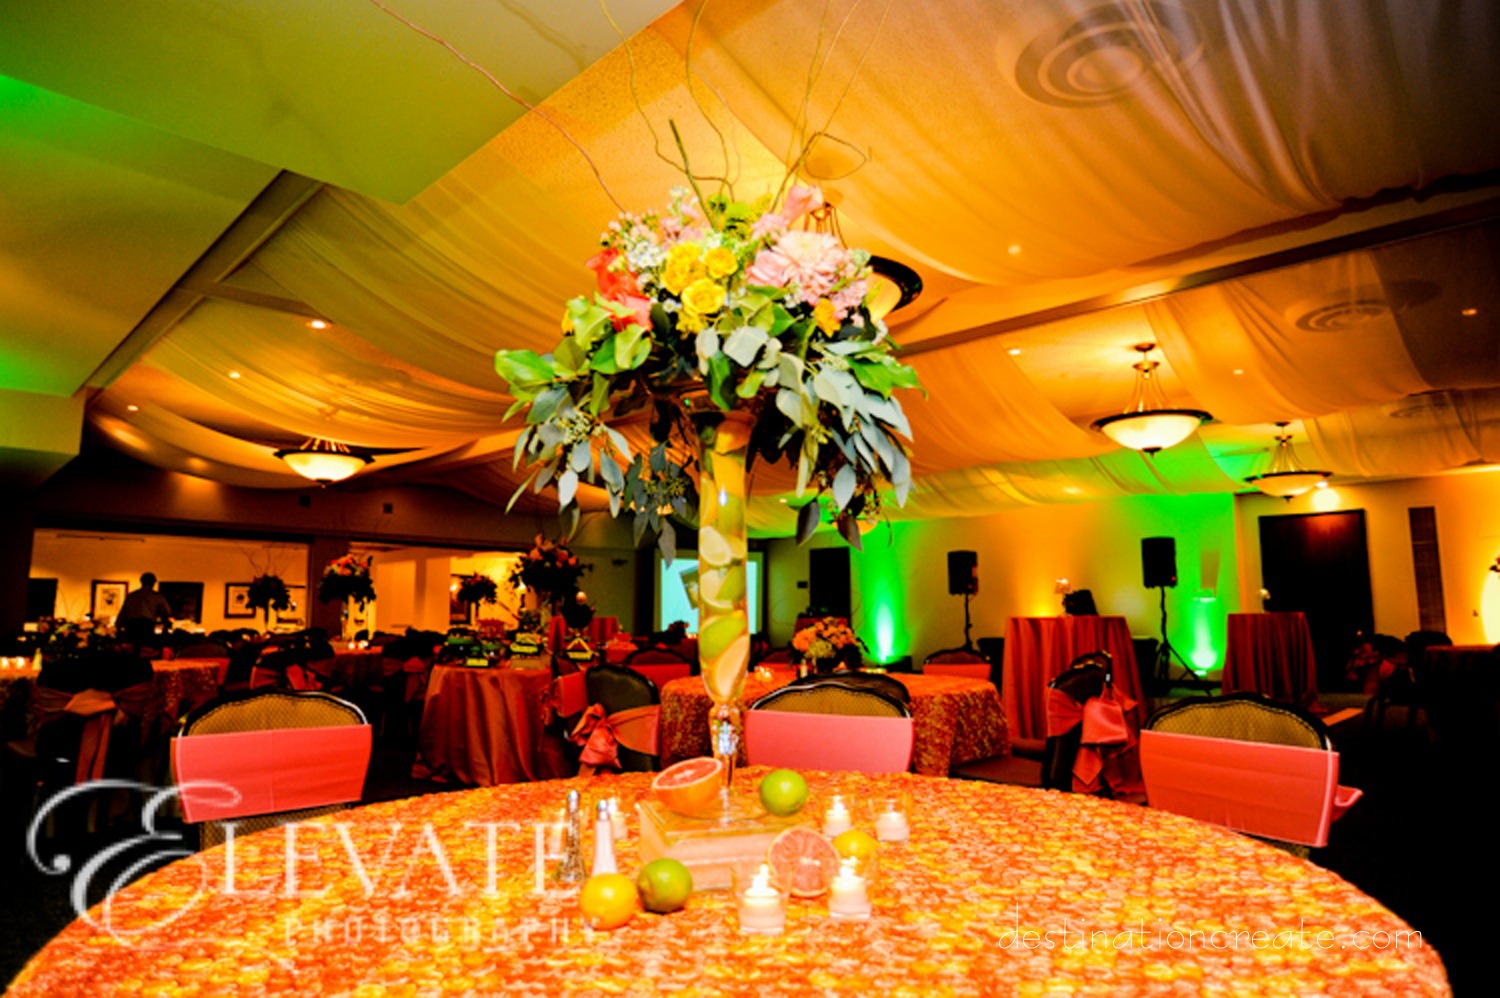 Columbine Country Club Wedding: Destination Create specializes in LDS wedding reception decorating, styling, planning & rentals.